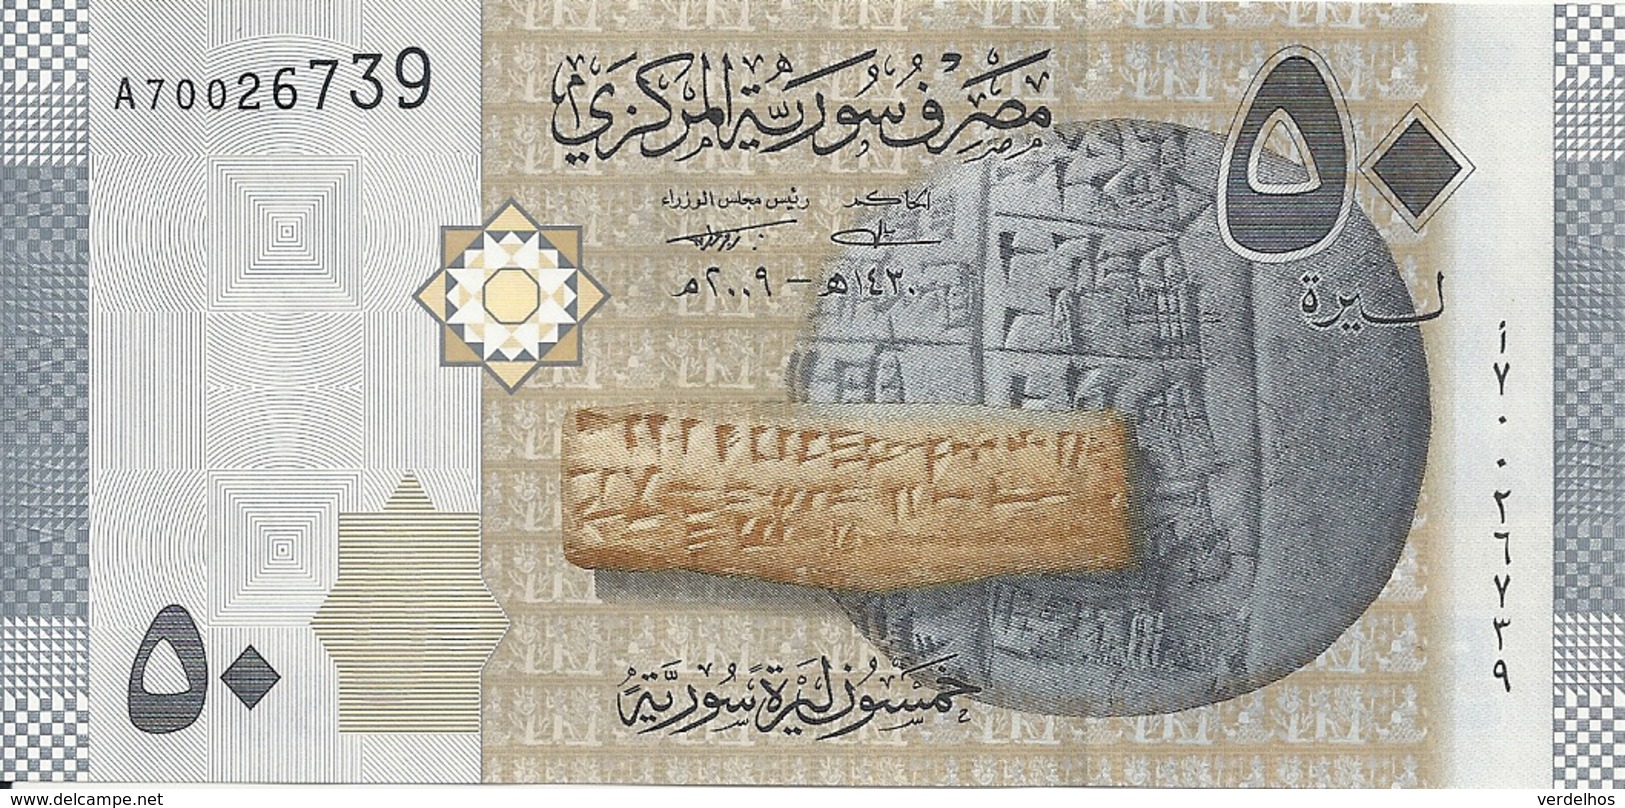 SYRIE 50 POUNDS 2009 UNC P 112 - Syrie